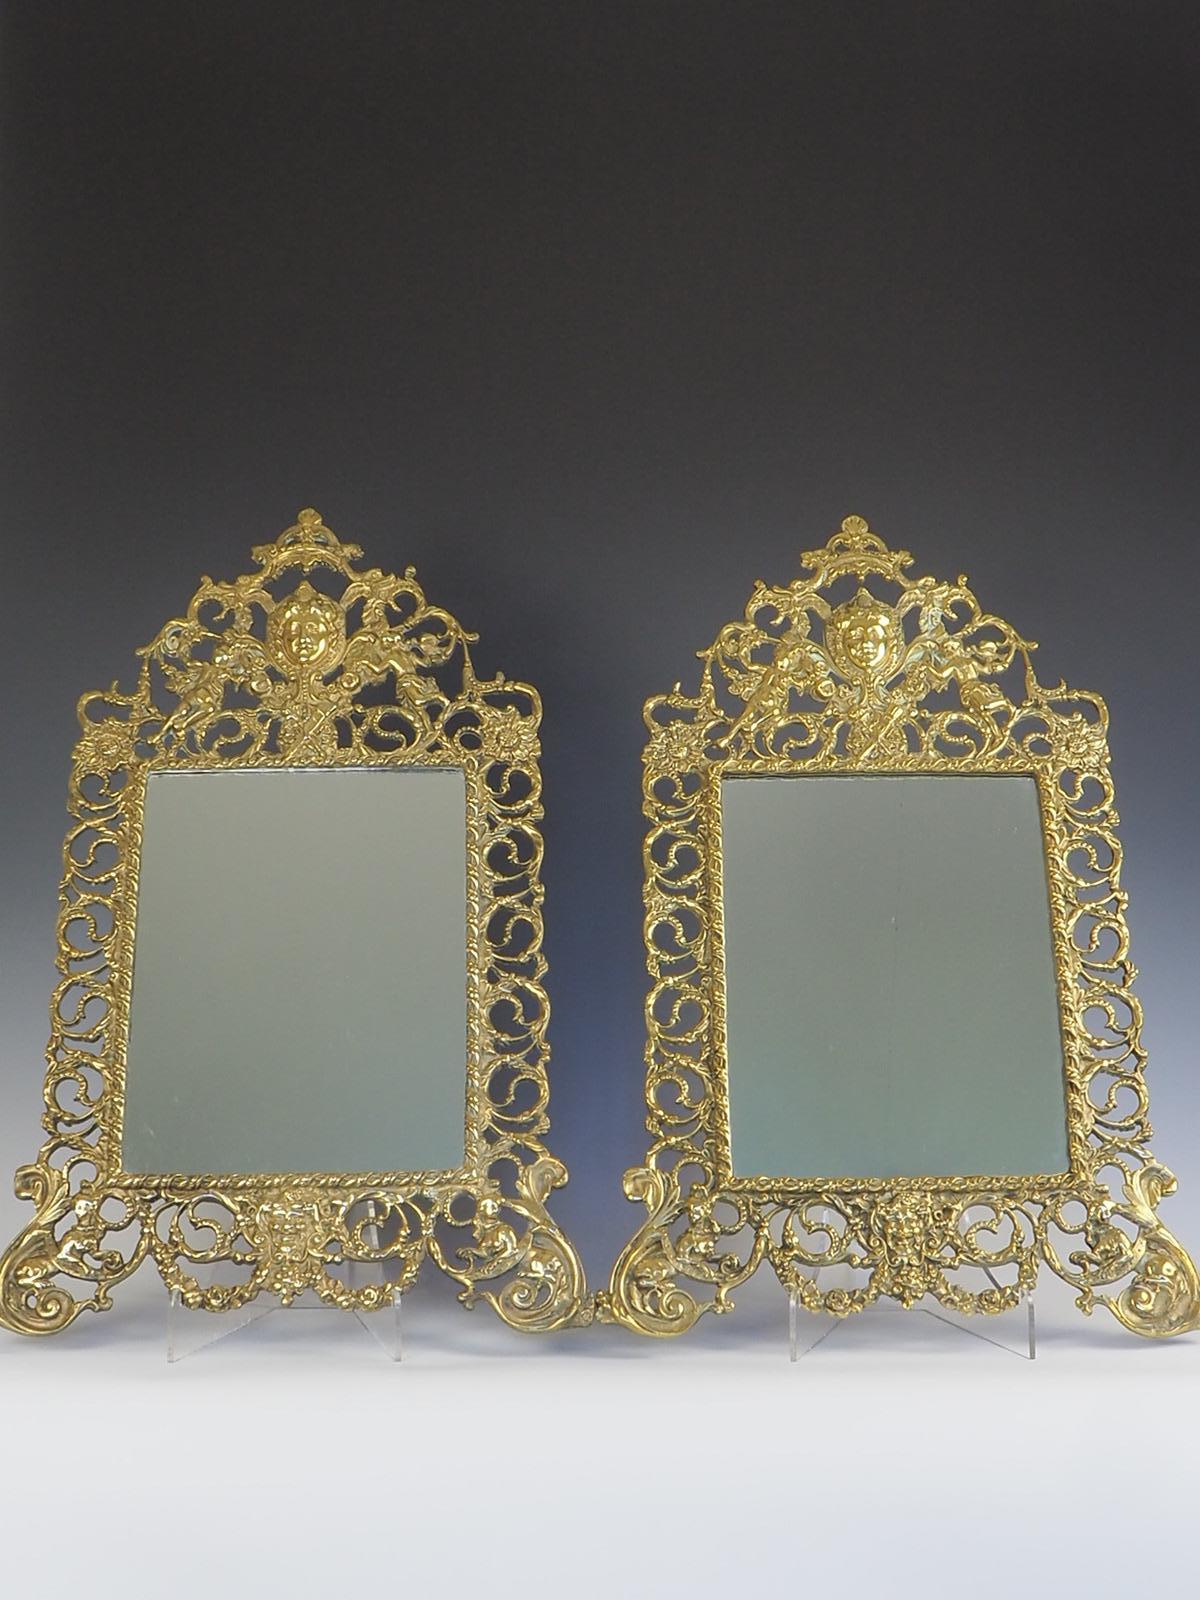 
Pair of Antique French Rococo Brass Wall Mirrors